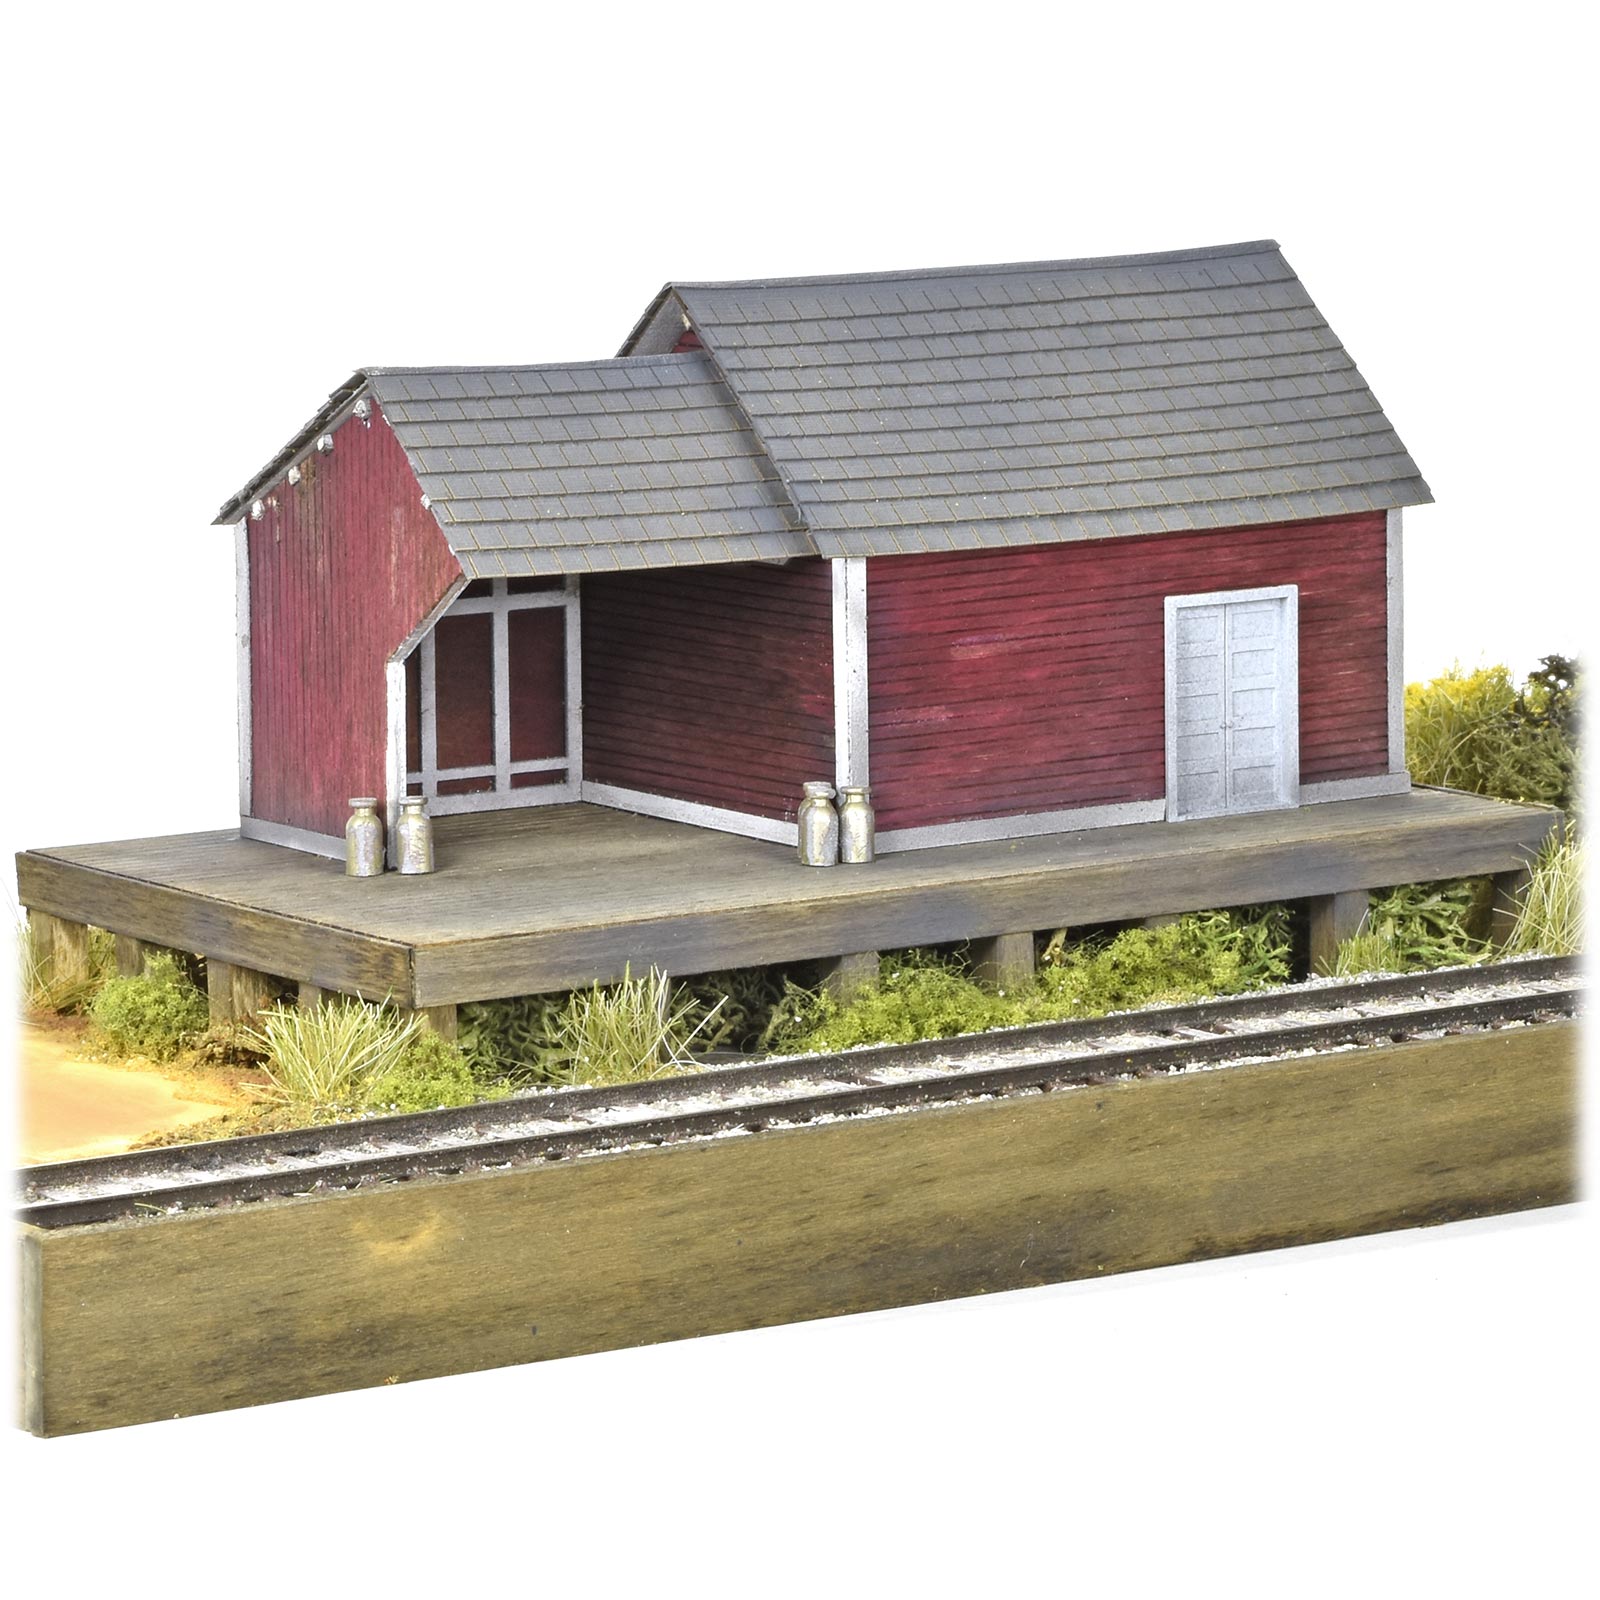 HO Scale By Scientific